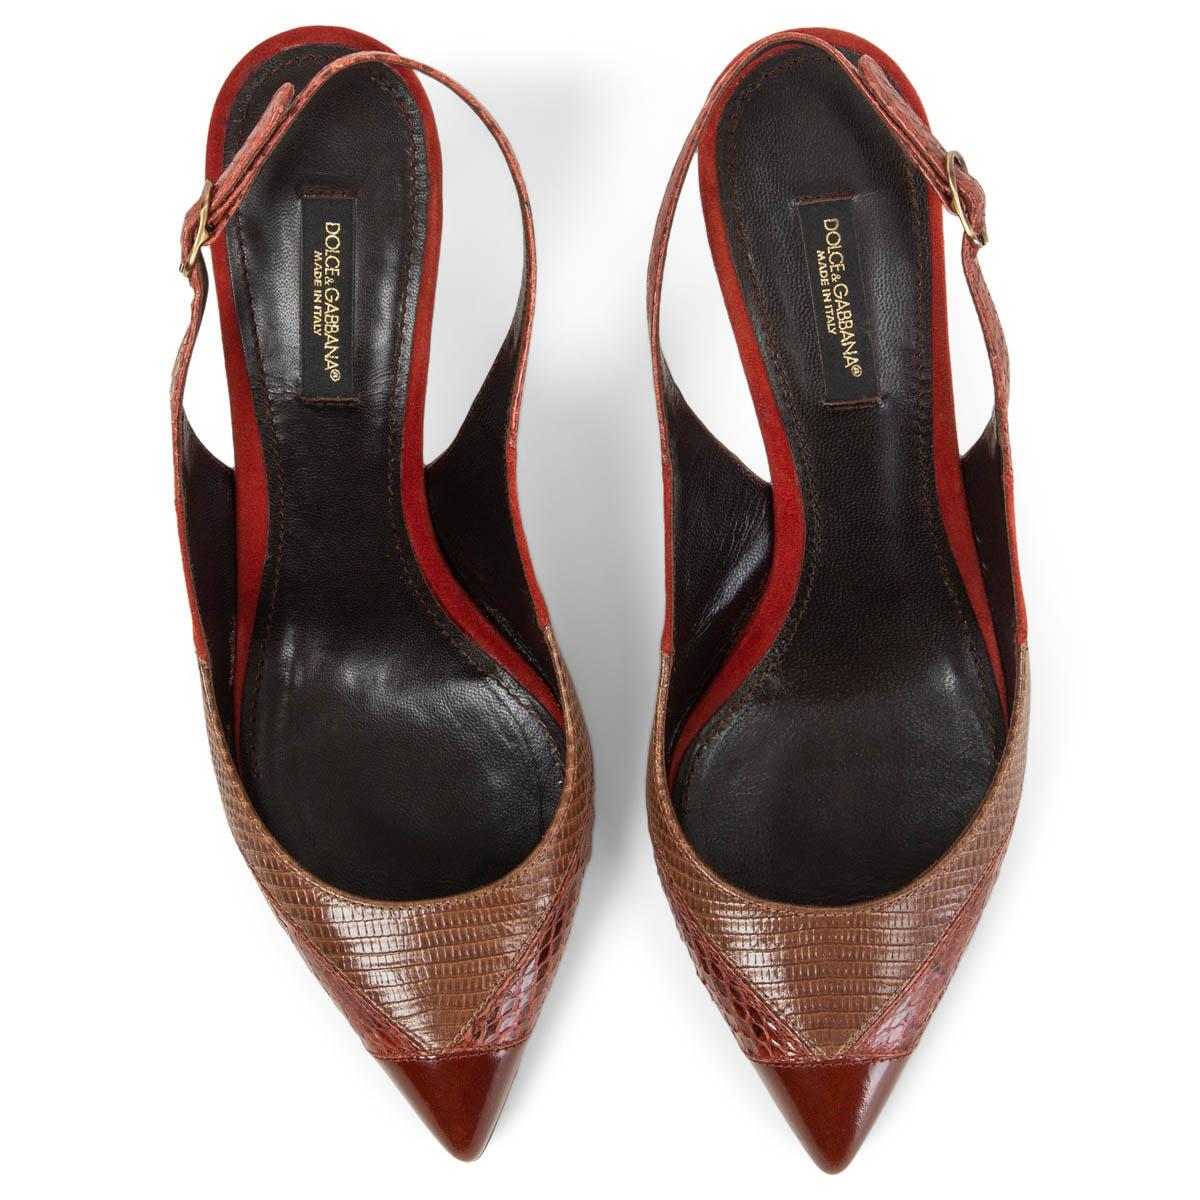 snakeskin pointed toe pumps